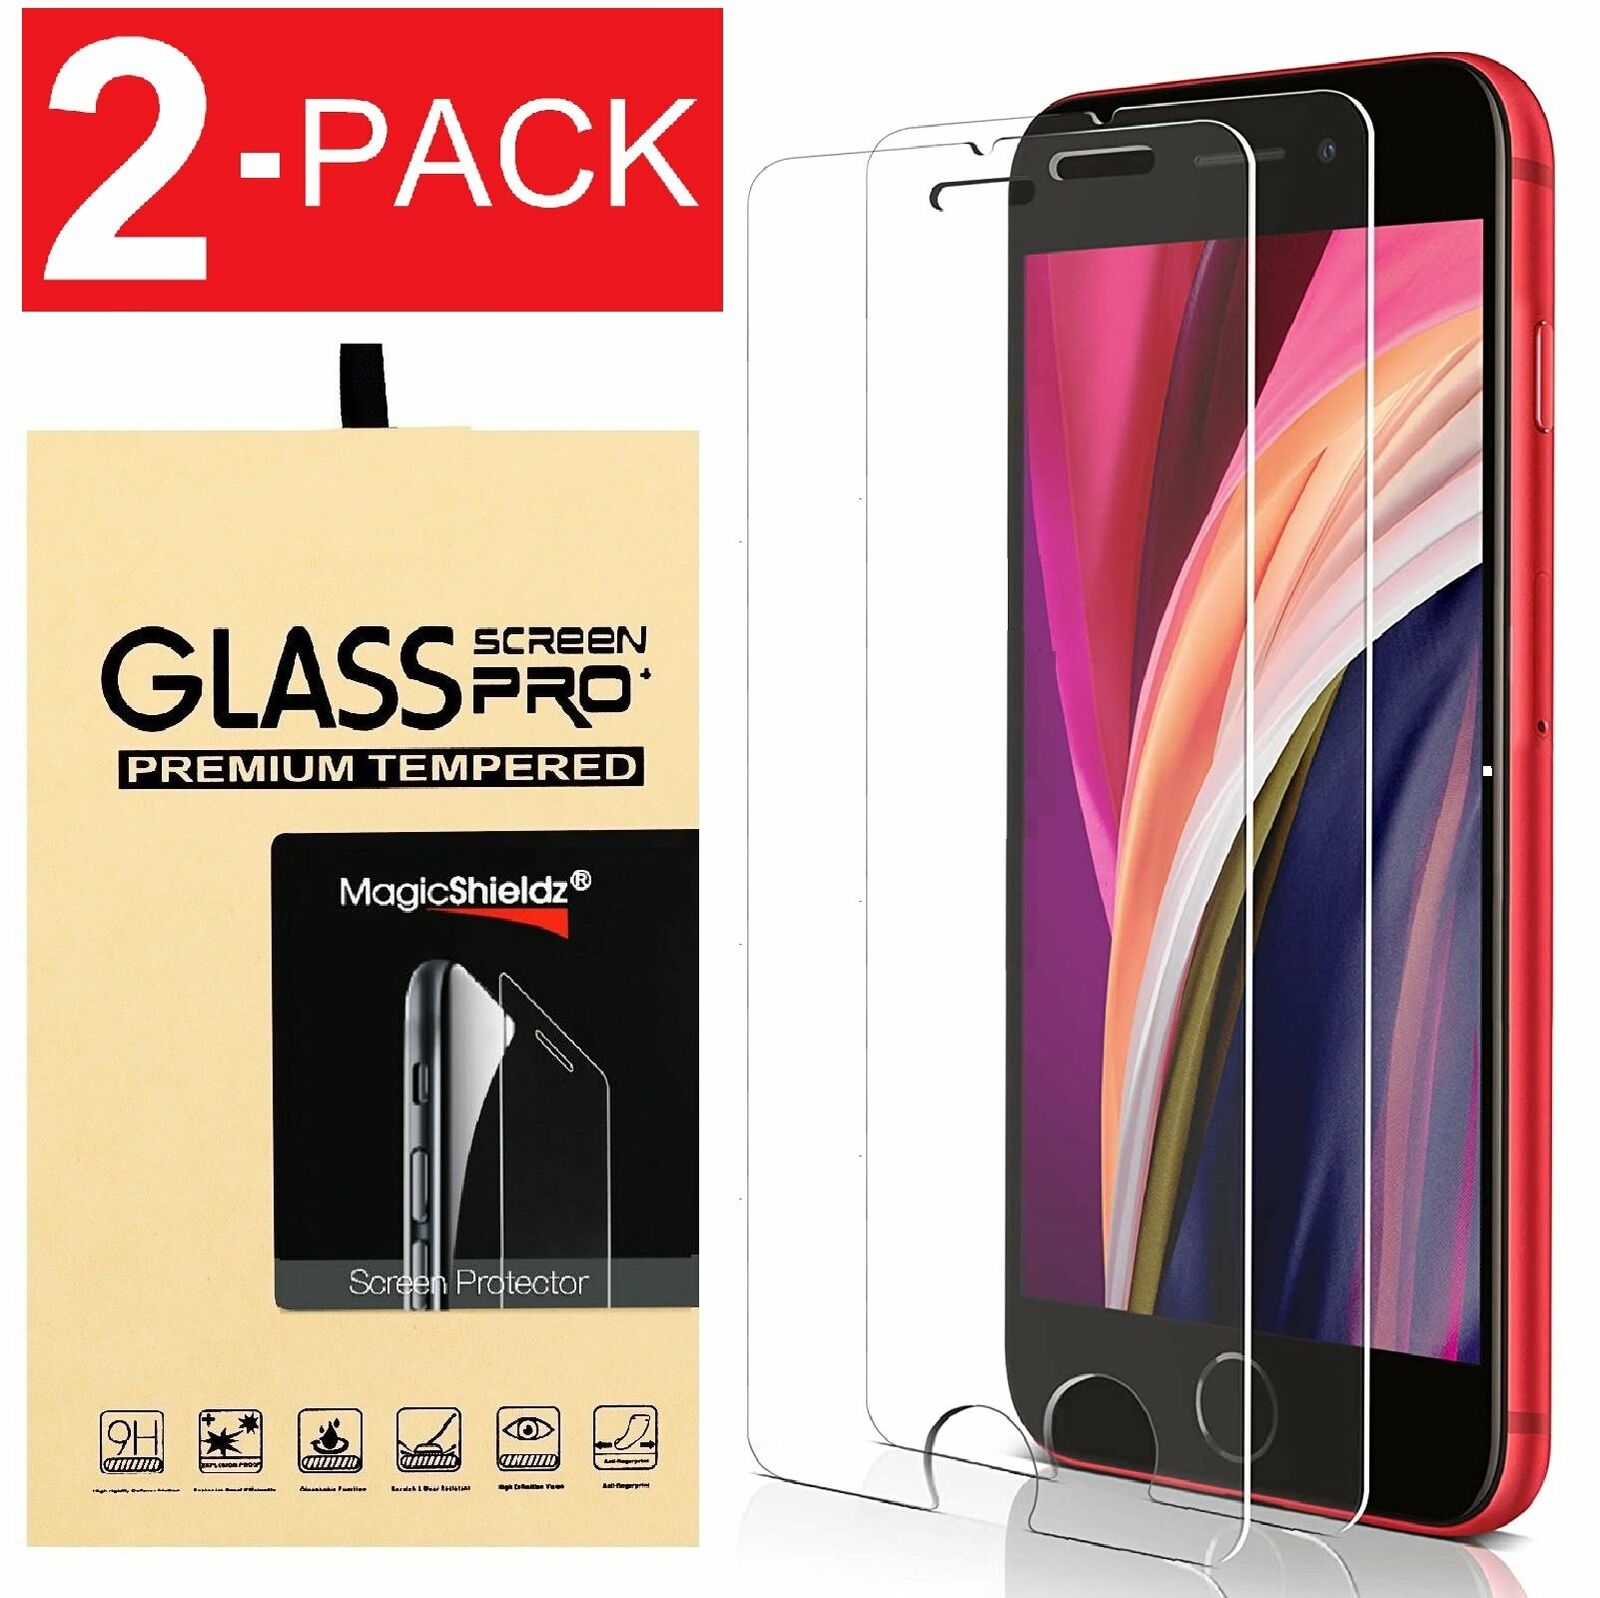 2-Pack Tempered GLASS Screen Protector For iPhone SE 2020